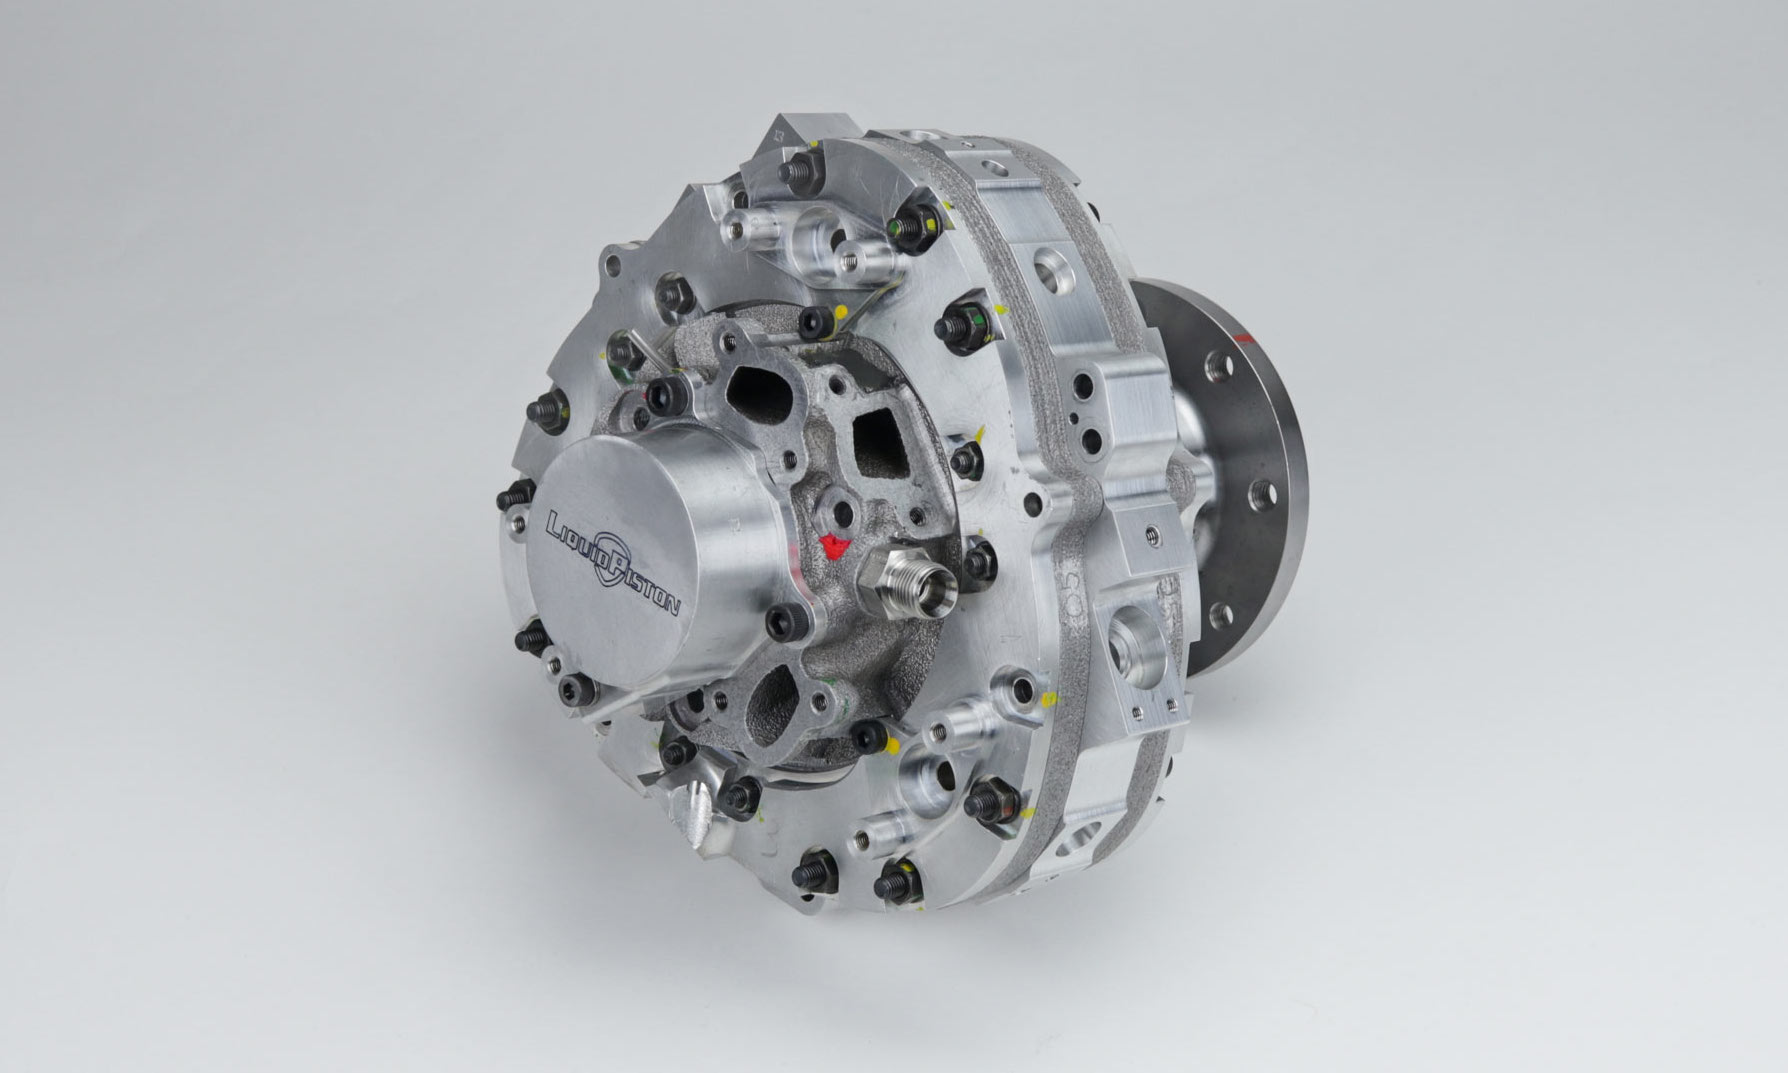 LiquidPiston Introduces XTS-210: A 25-Horsepower Heavy-Fueled Rotary Engine in a Basketball-Sized Package